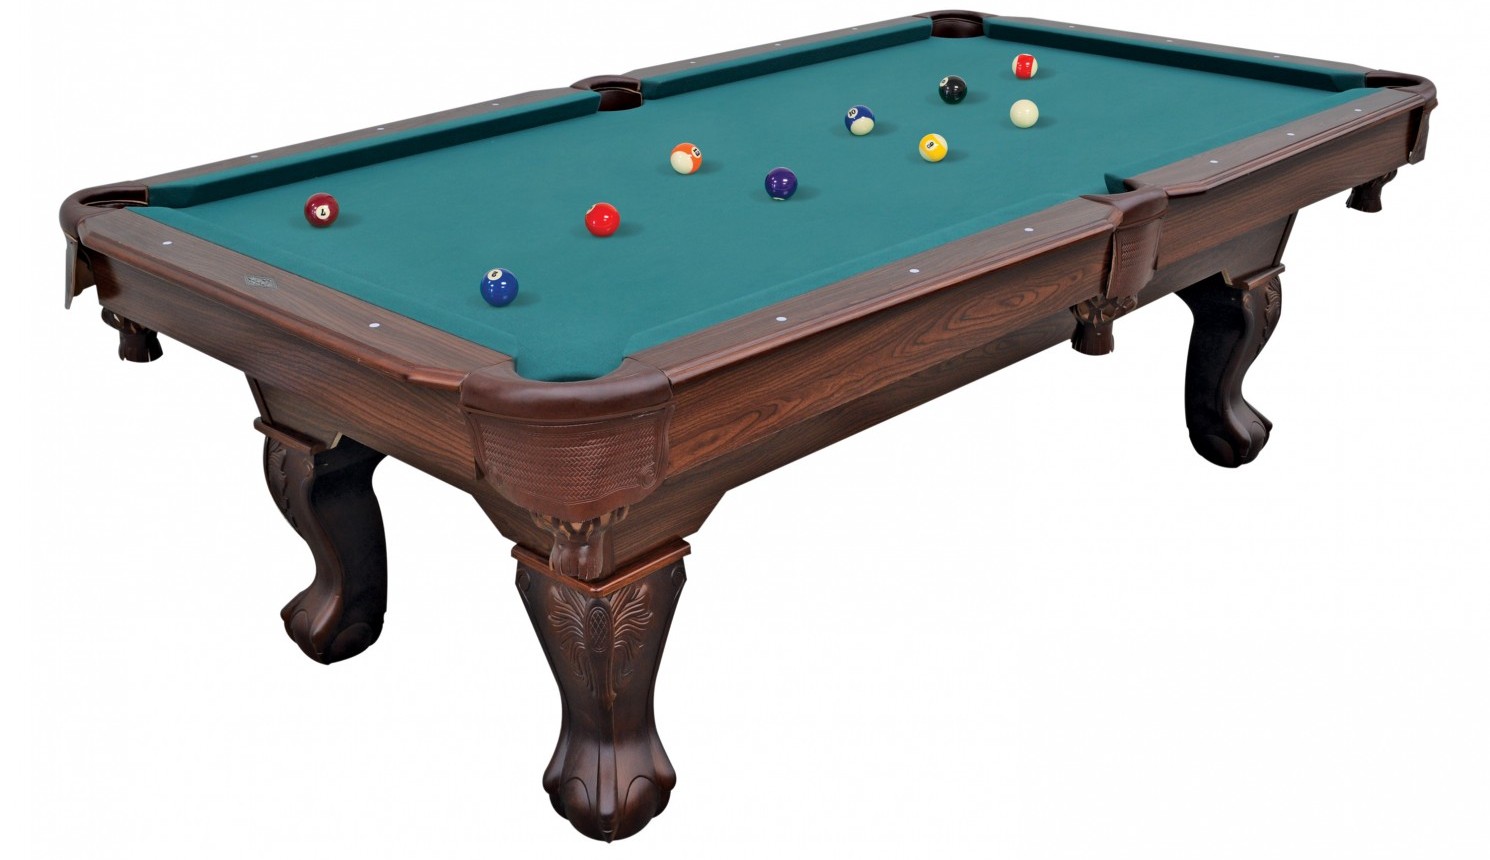 eastpoint sports 84 inch saxton billiards pool table image